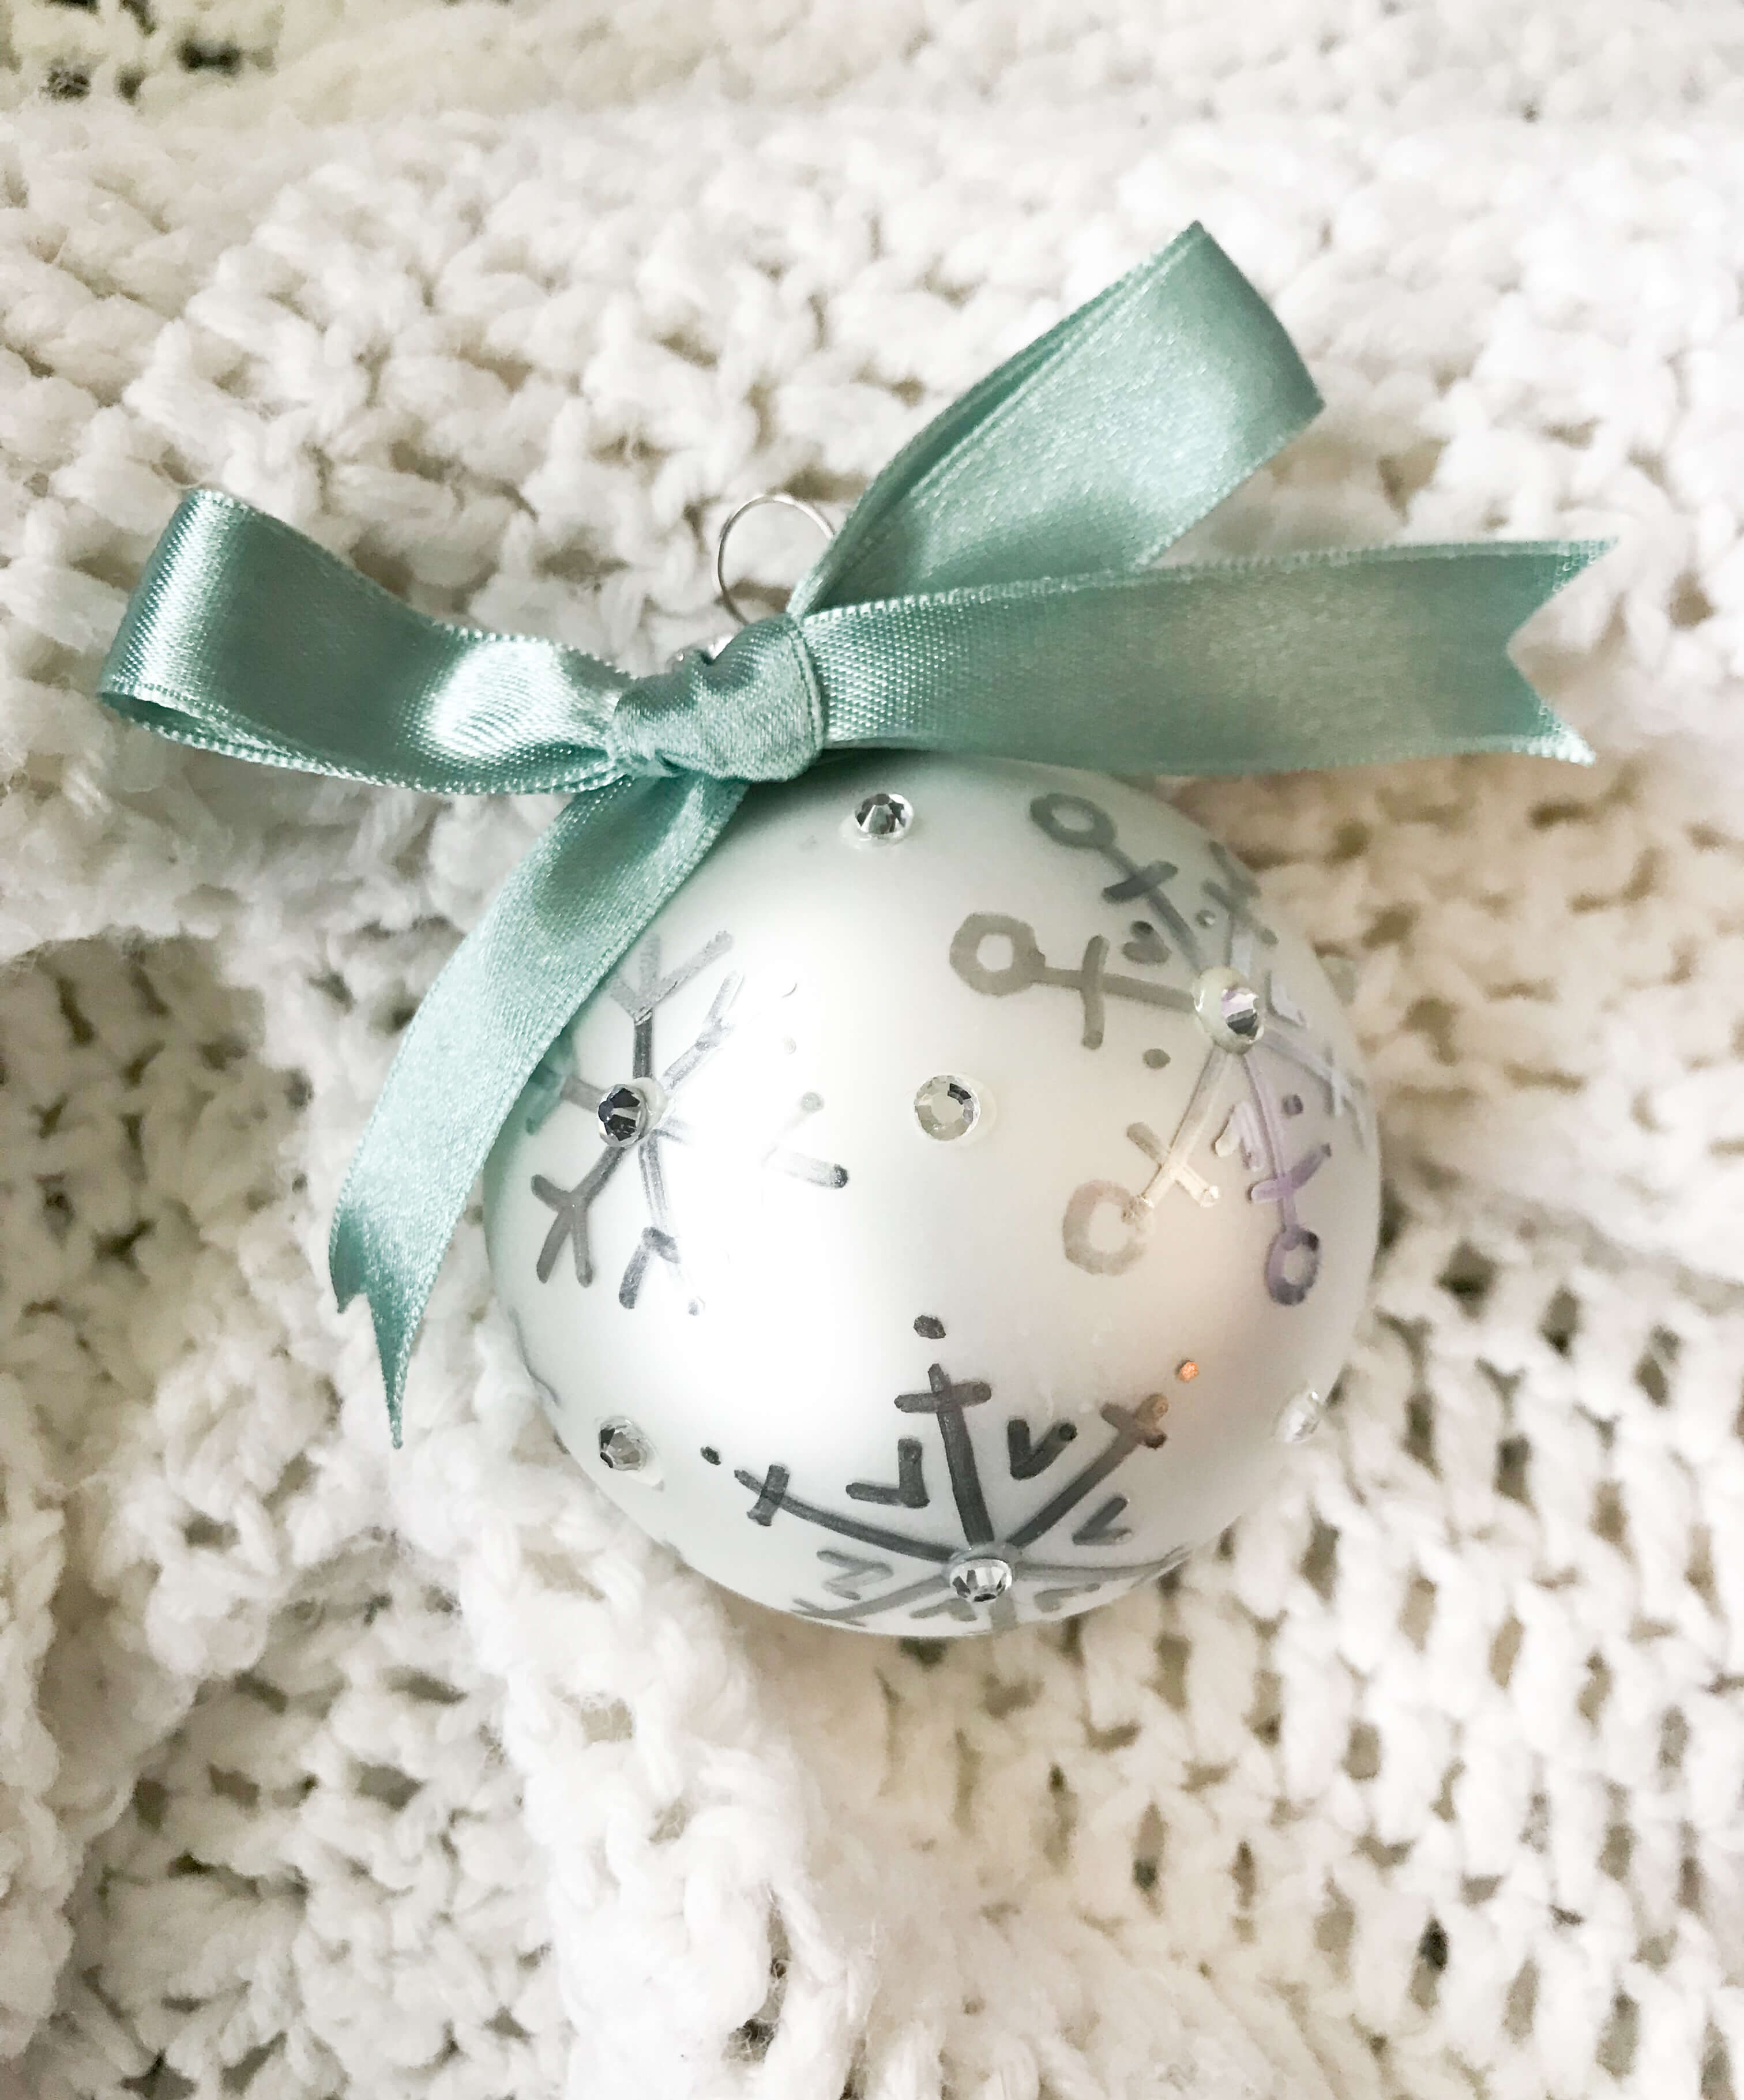 Learn how to create and bejewel your own, personalized, hand lettered Christmas ornaments with this free video tutorial and fully linked supply list from Amanda Arneill of amandaarneill.com